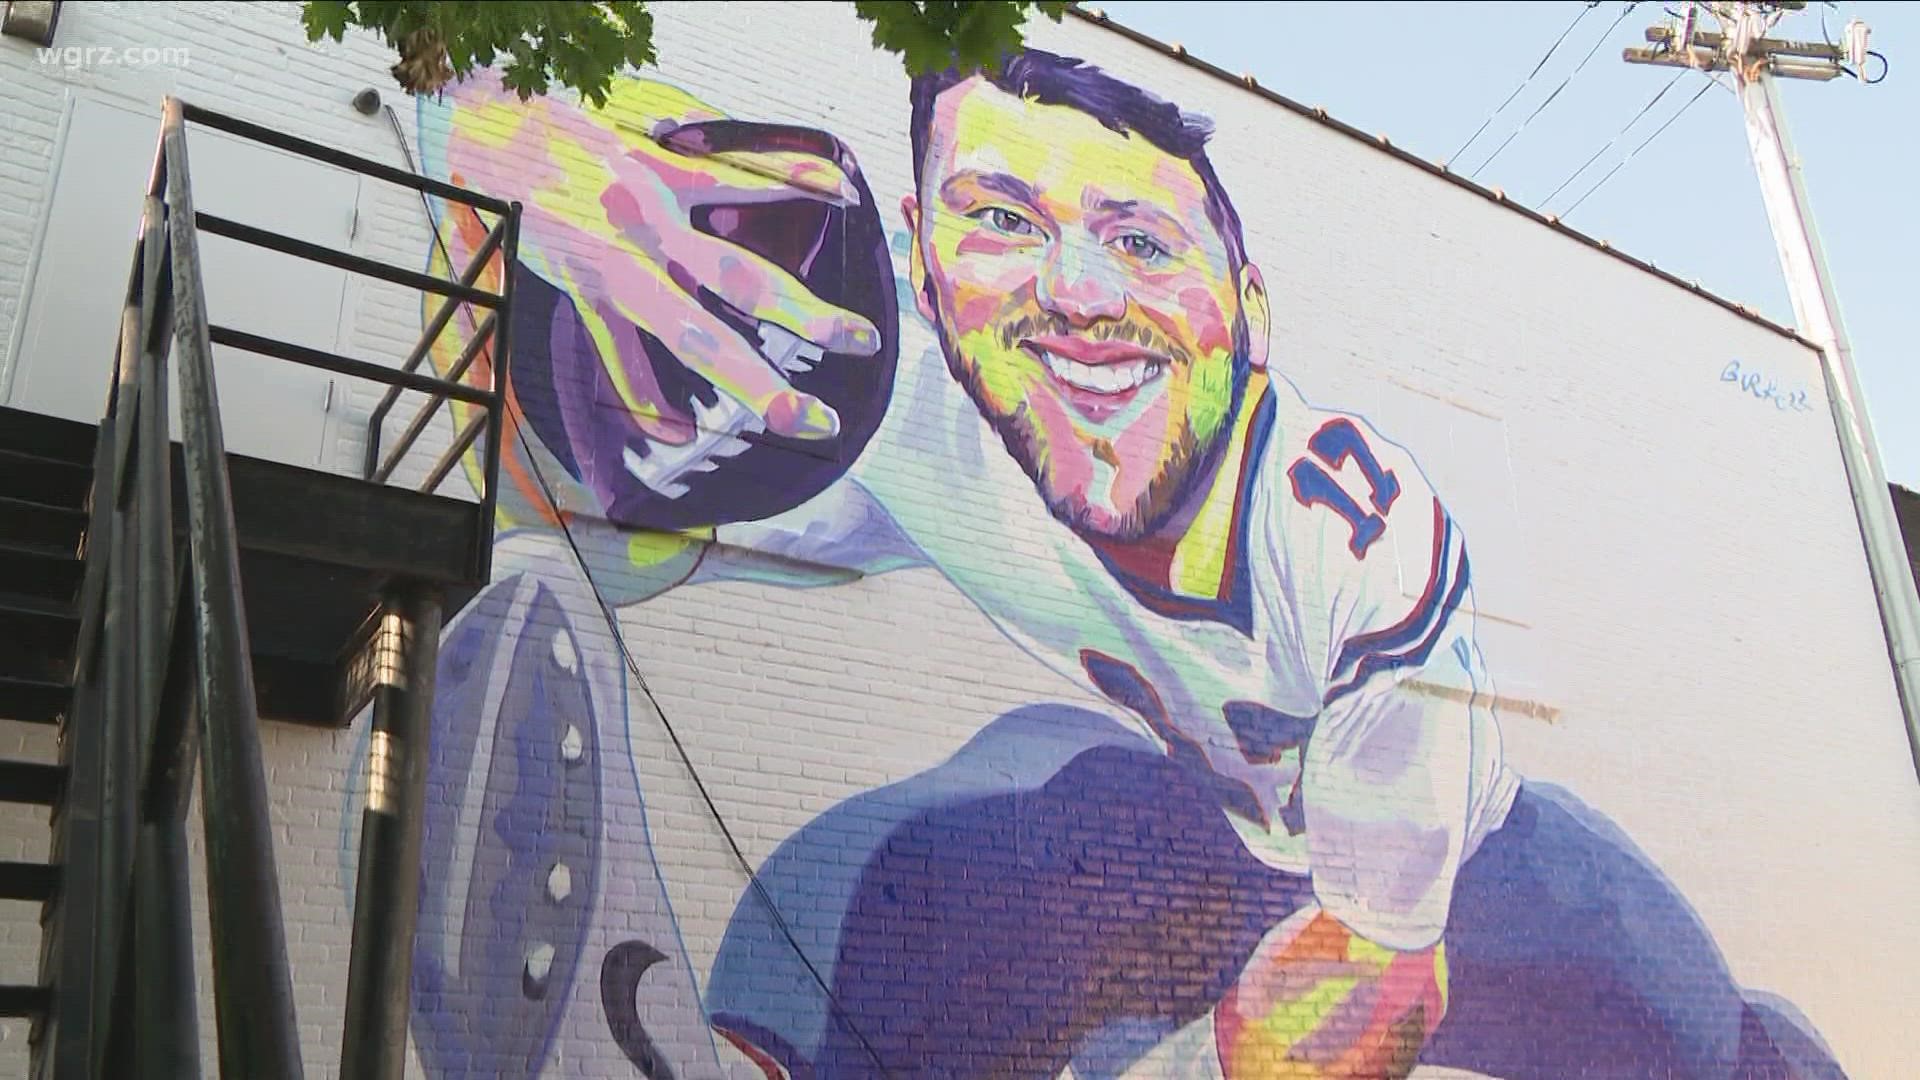 While we all wait for the Bills season to kick off, you can enjoy a beer with Josh Allen, well a mural of him that is.